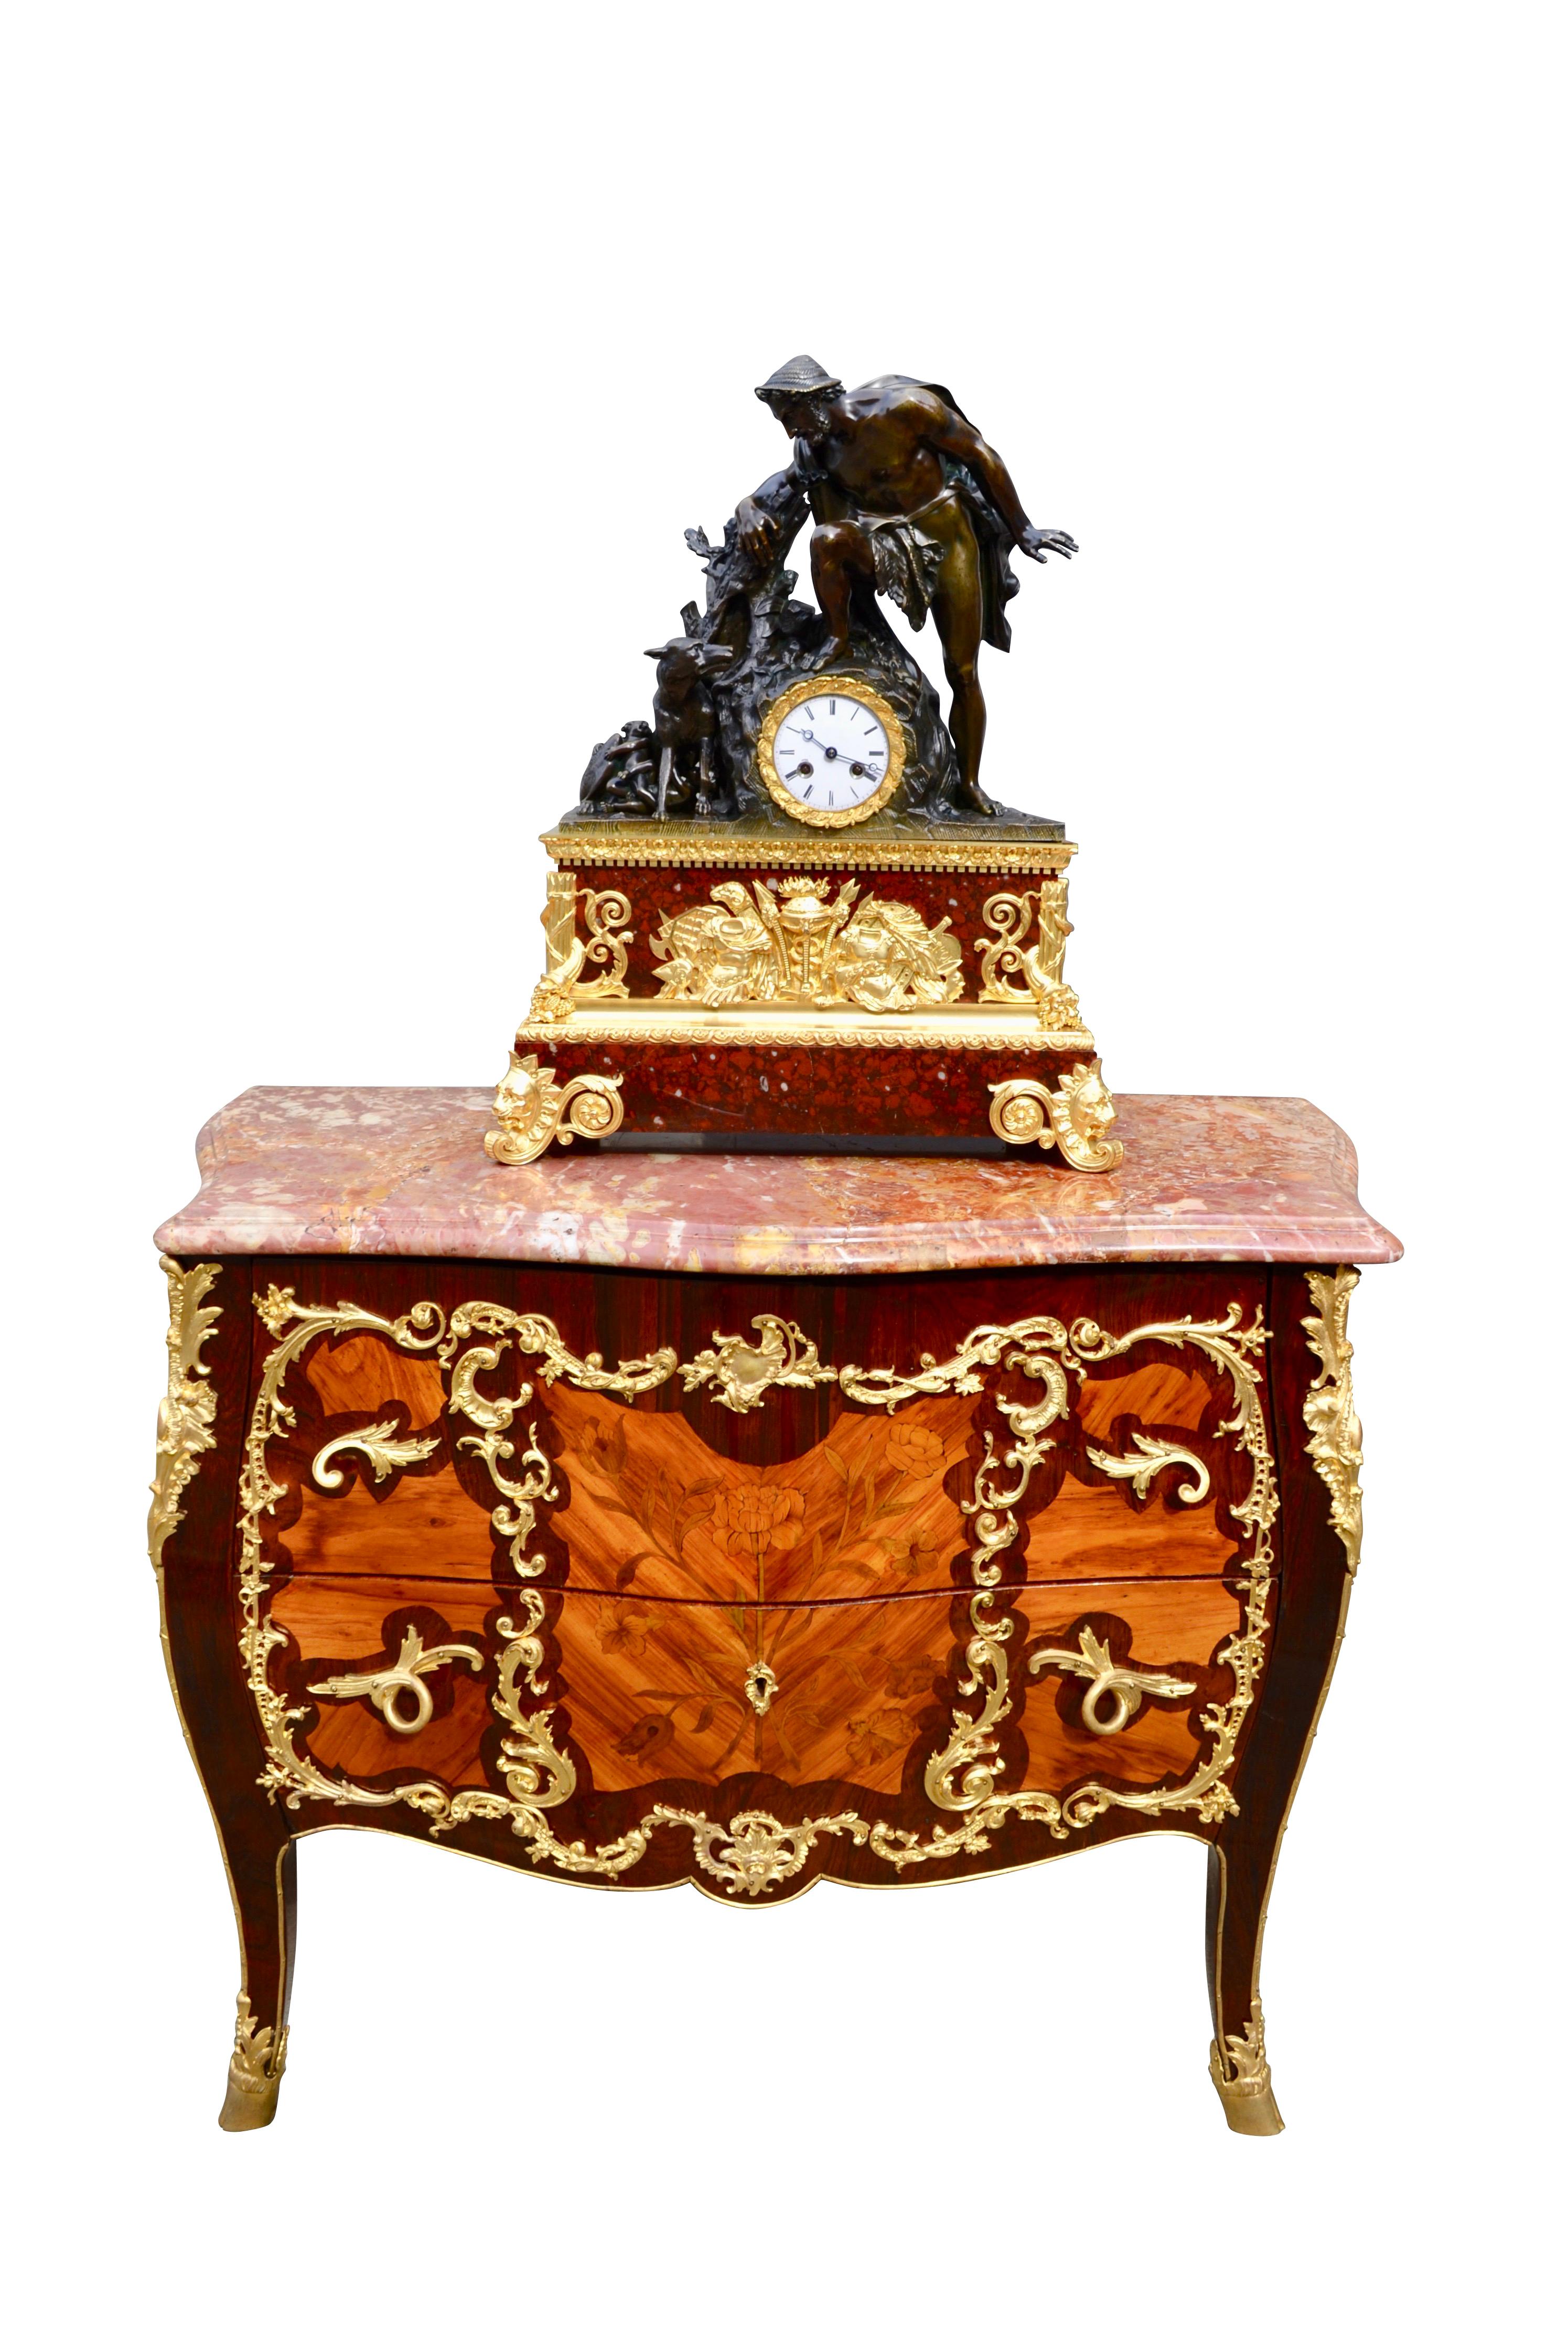 19th Century French Louis XV Style Marquetry and Ormolu Bombe Chest of Drawers For Sale 4